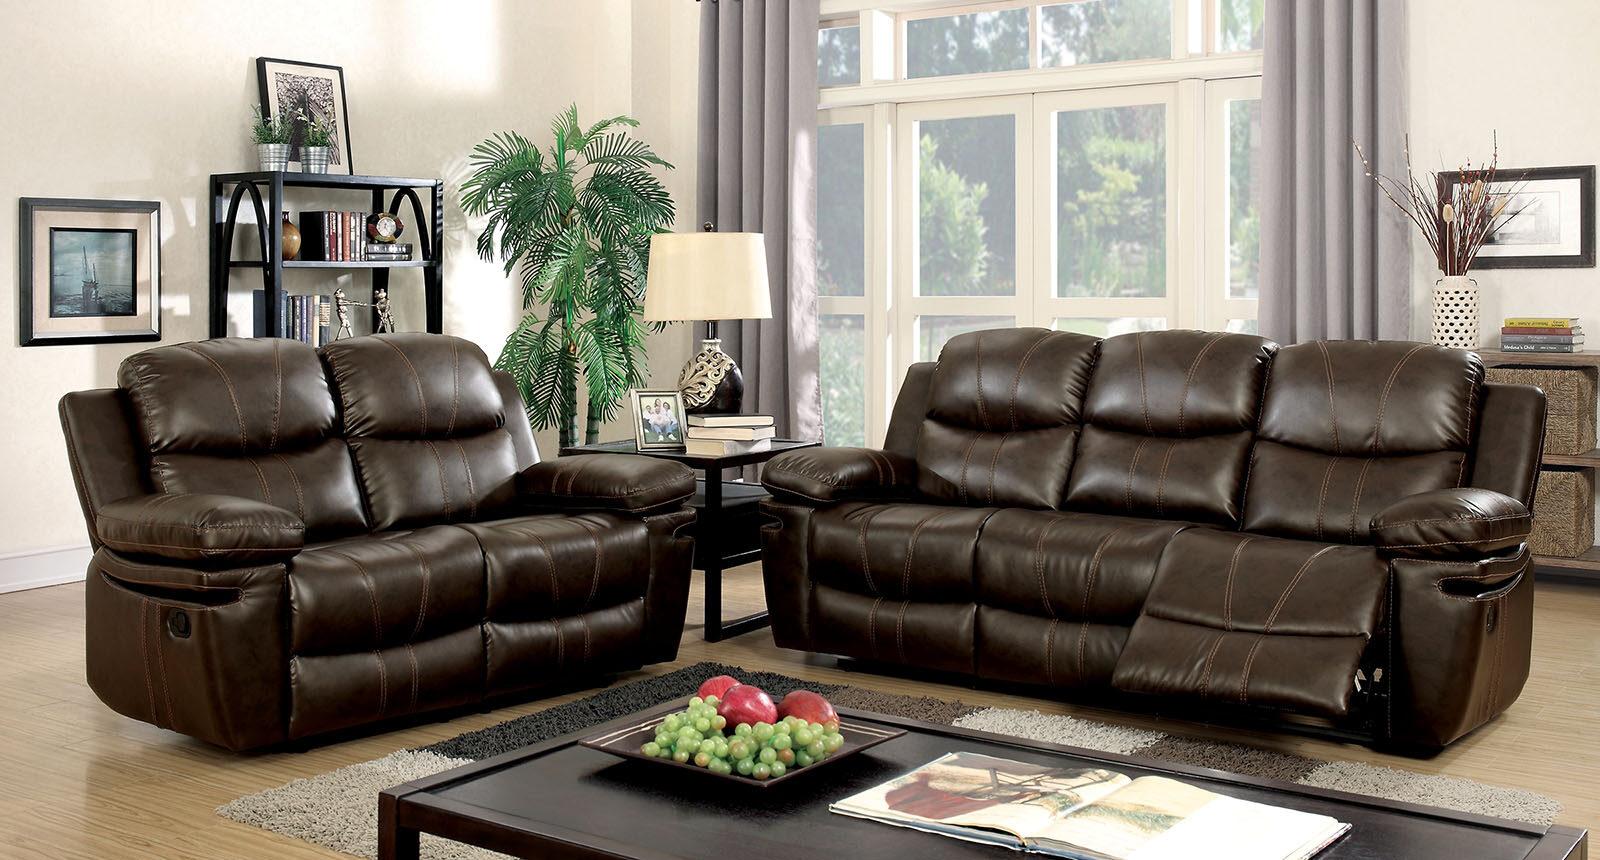 Transitional Recliner Sofa Loveseat and Chair CM6992-3PC Listowel CM6992-3PC in Brown Bonded Leather